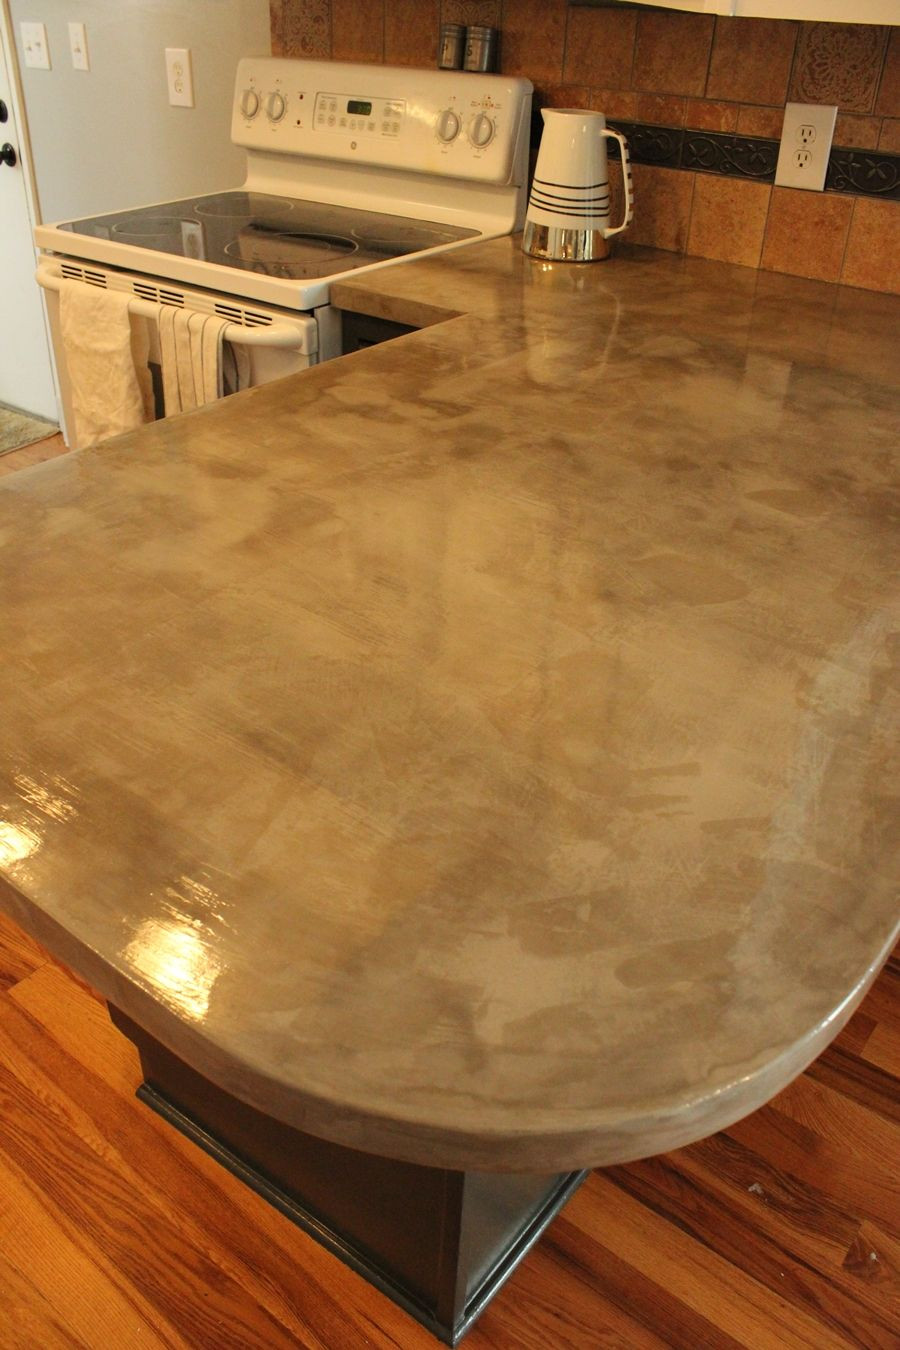 Kitchen Counters Diy
 DIY Concrete Kitchen Countertops A Step by Step Tutorial